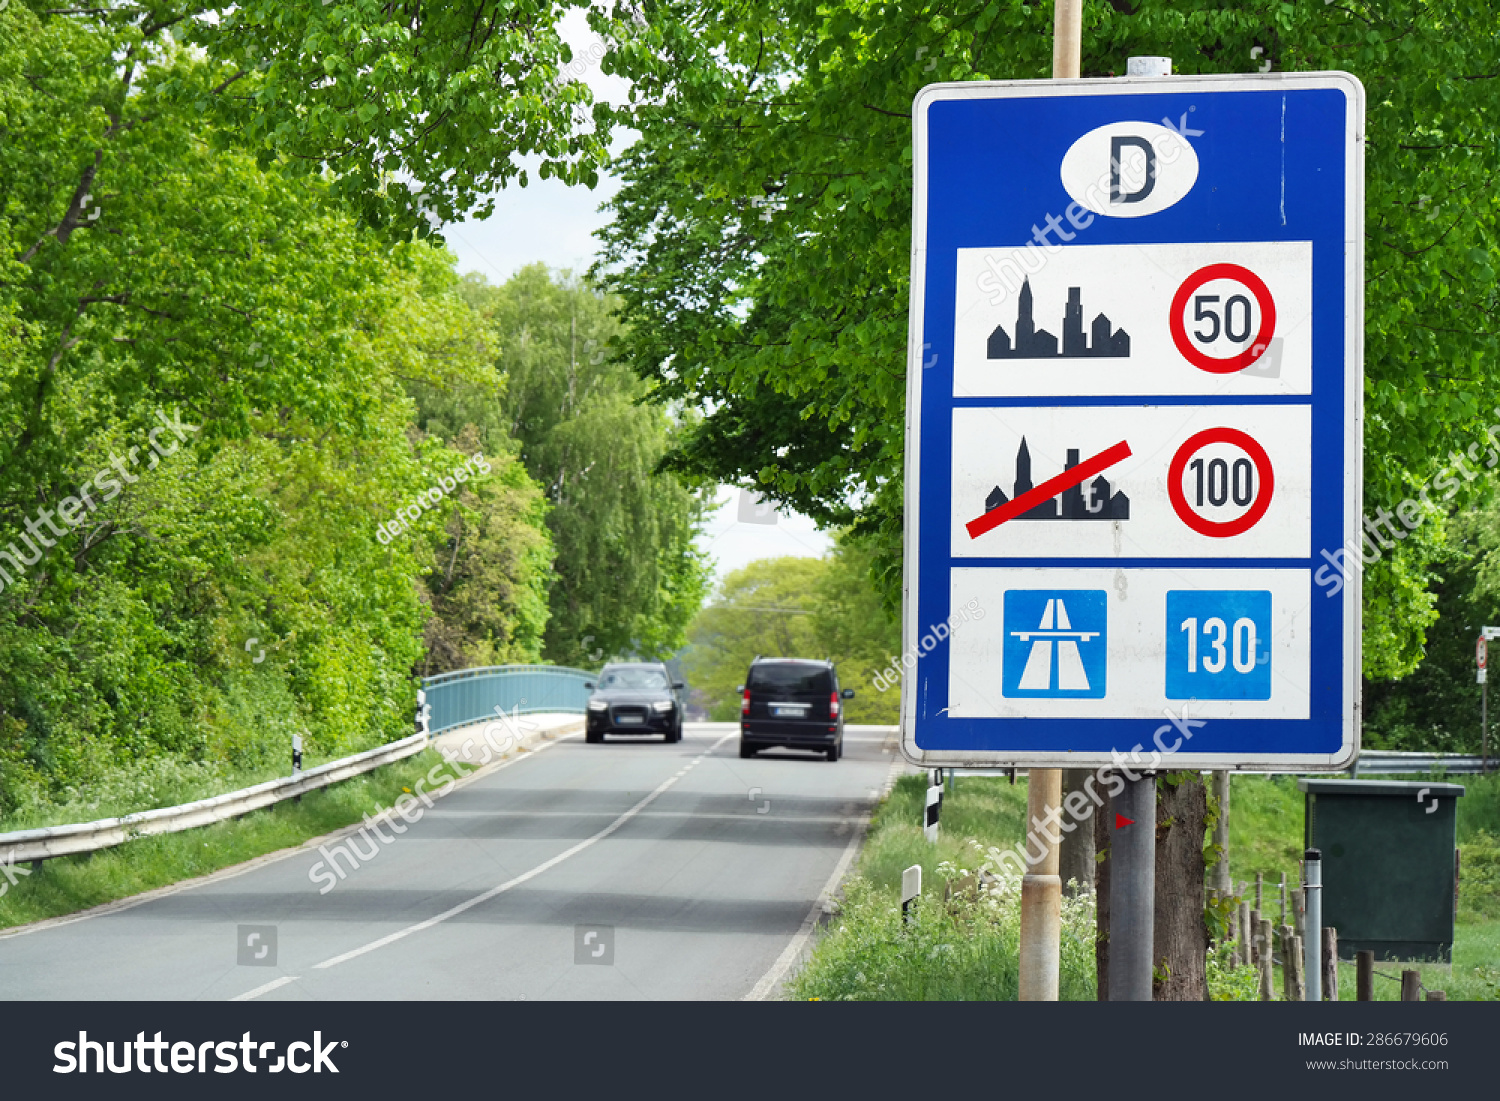 Sign Of Speed Limits At The German Border Stock Photo 286679606 ...